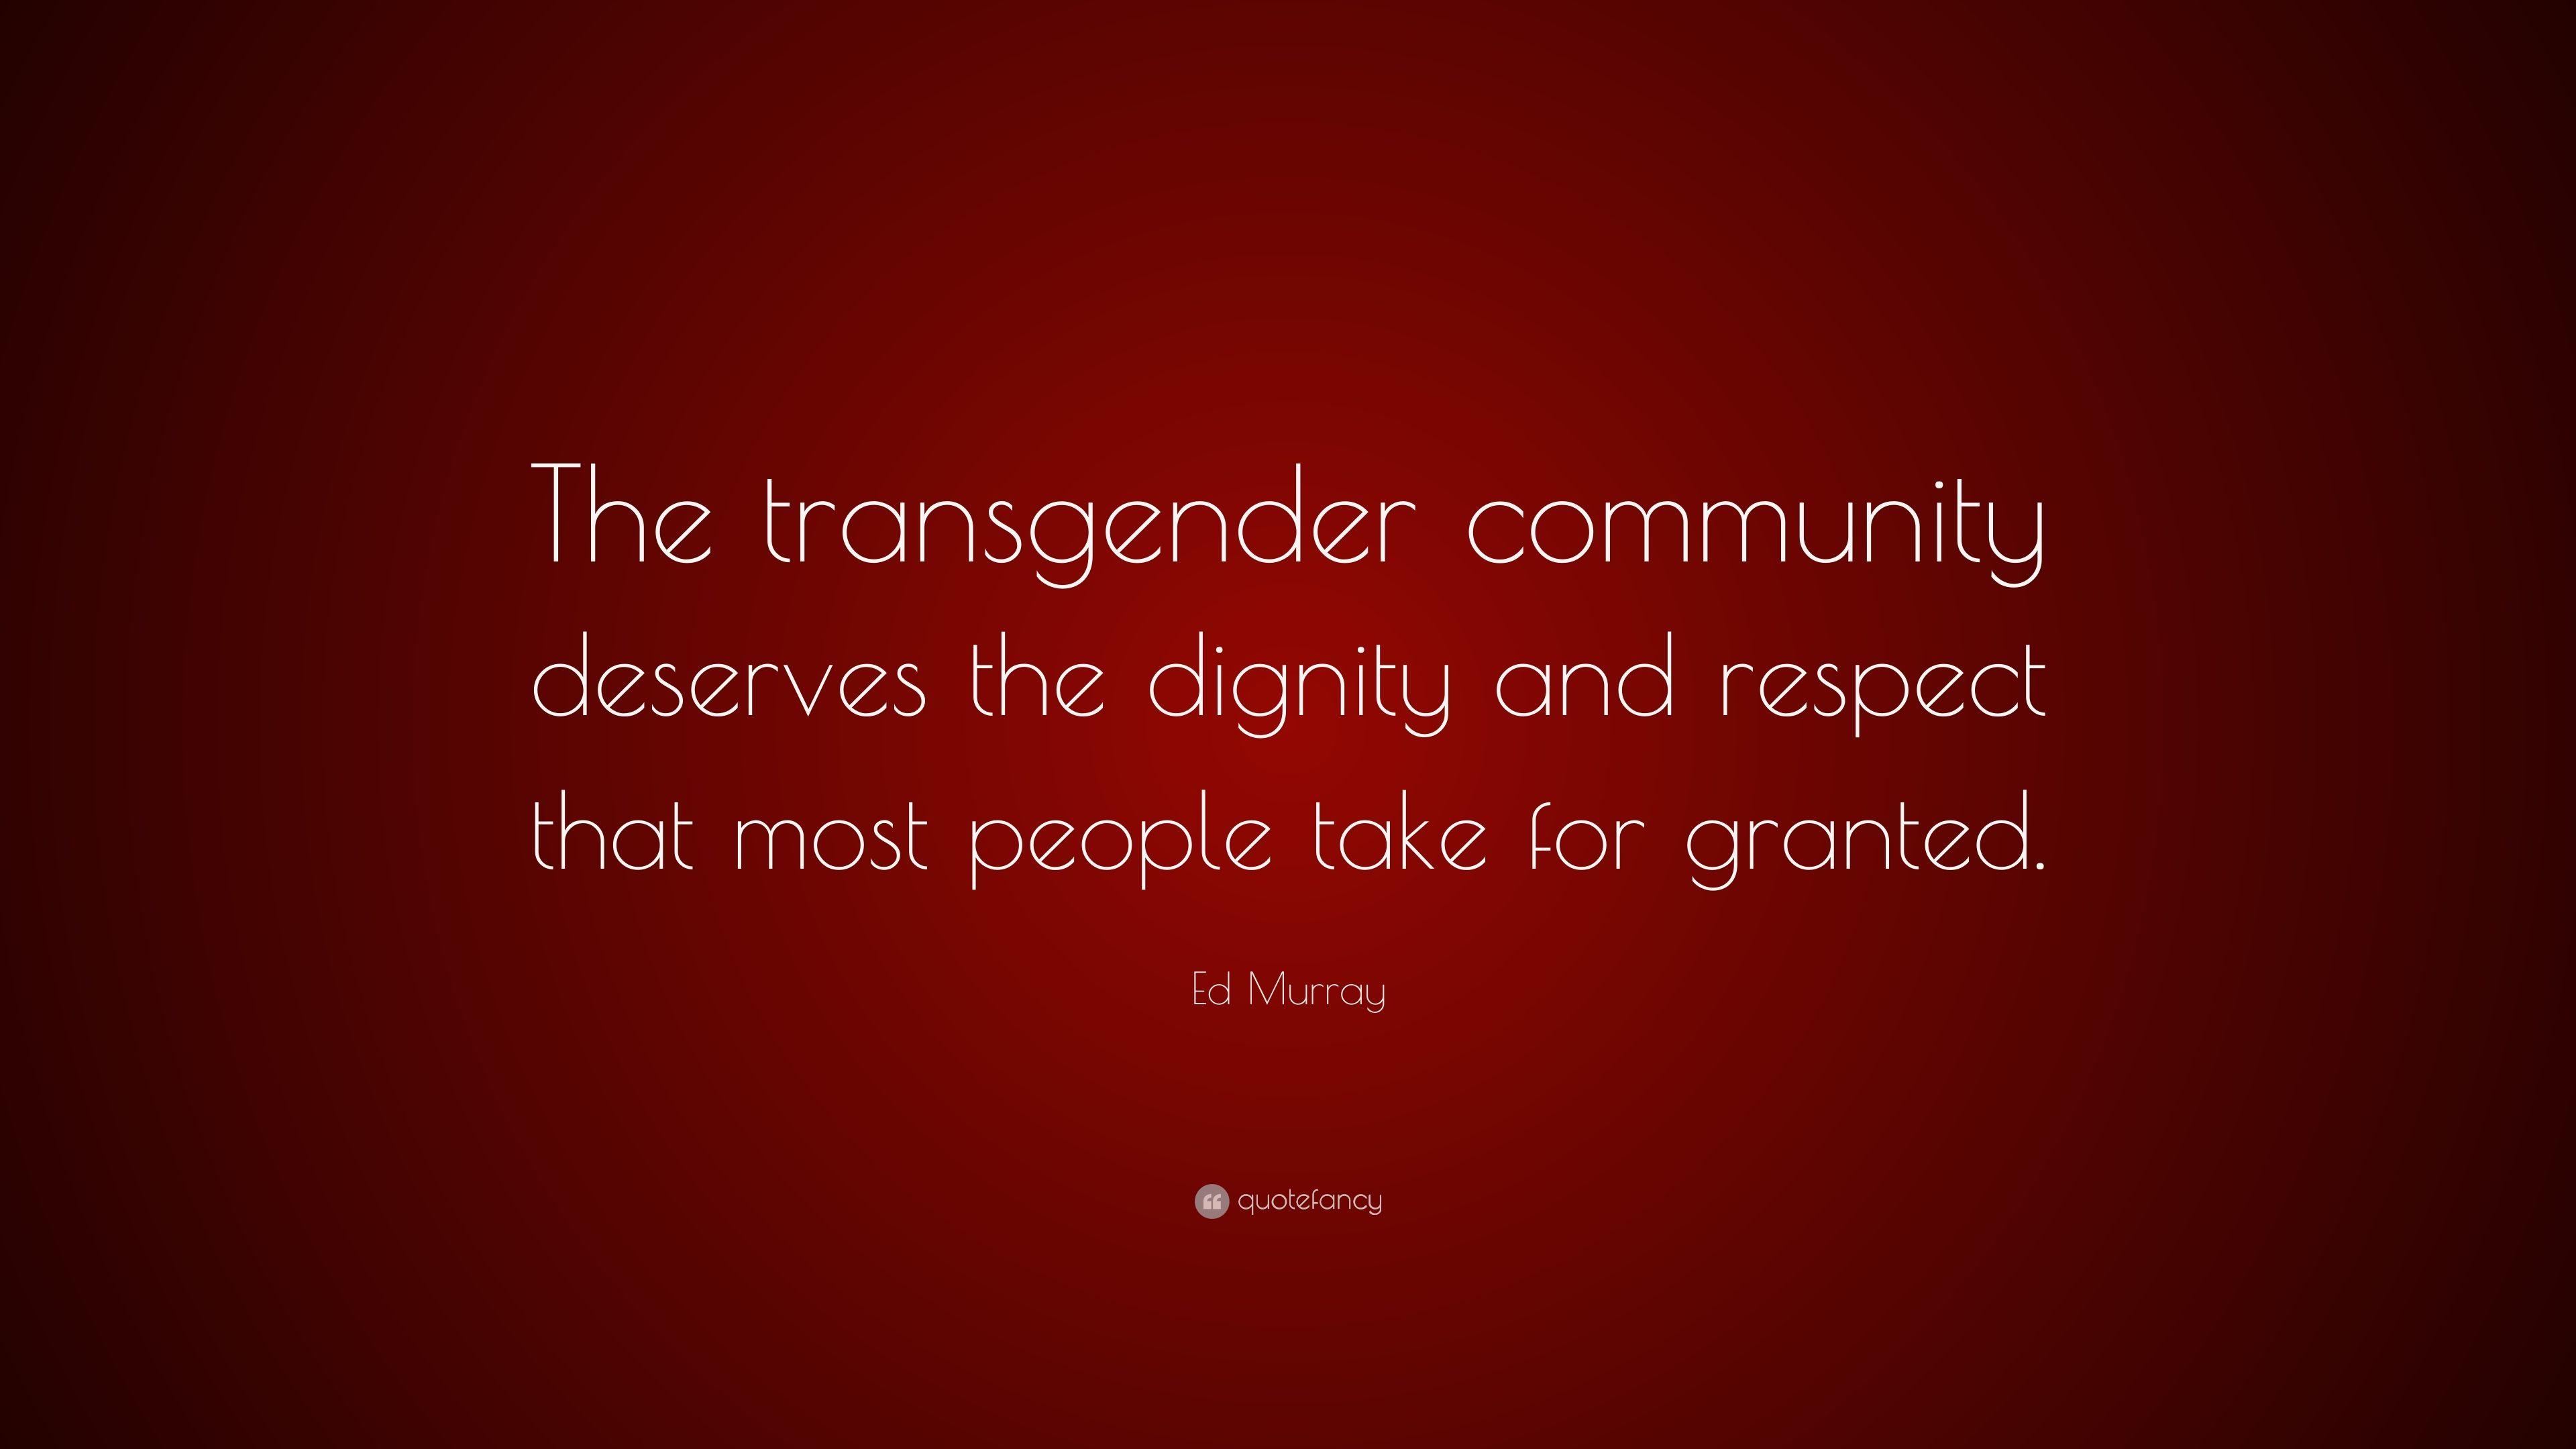 Ed Murray Quote: “The transgender community deserves the dignity